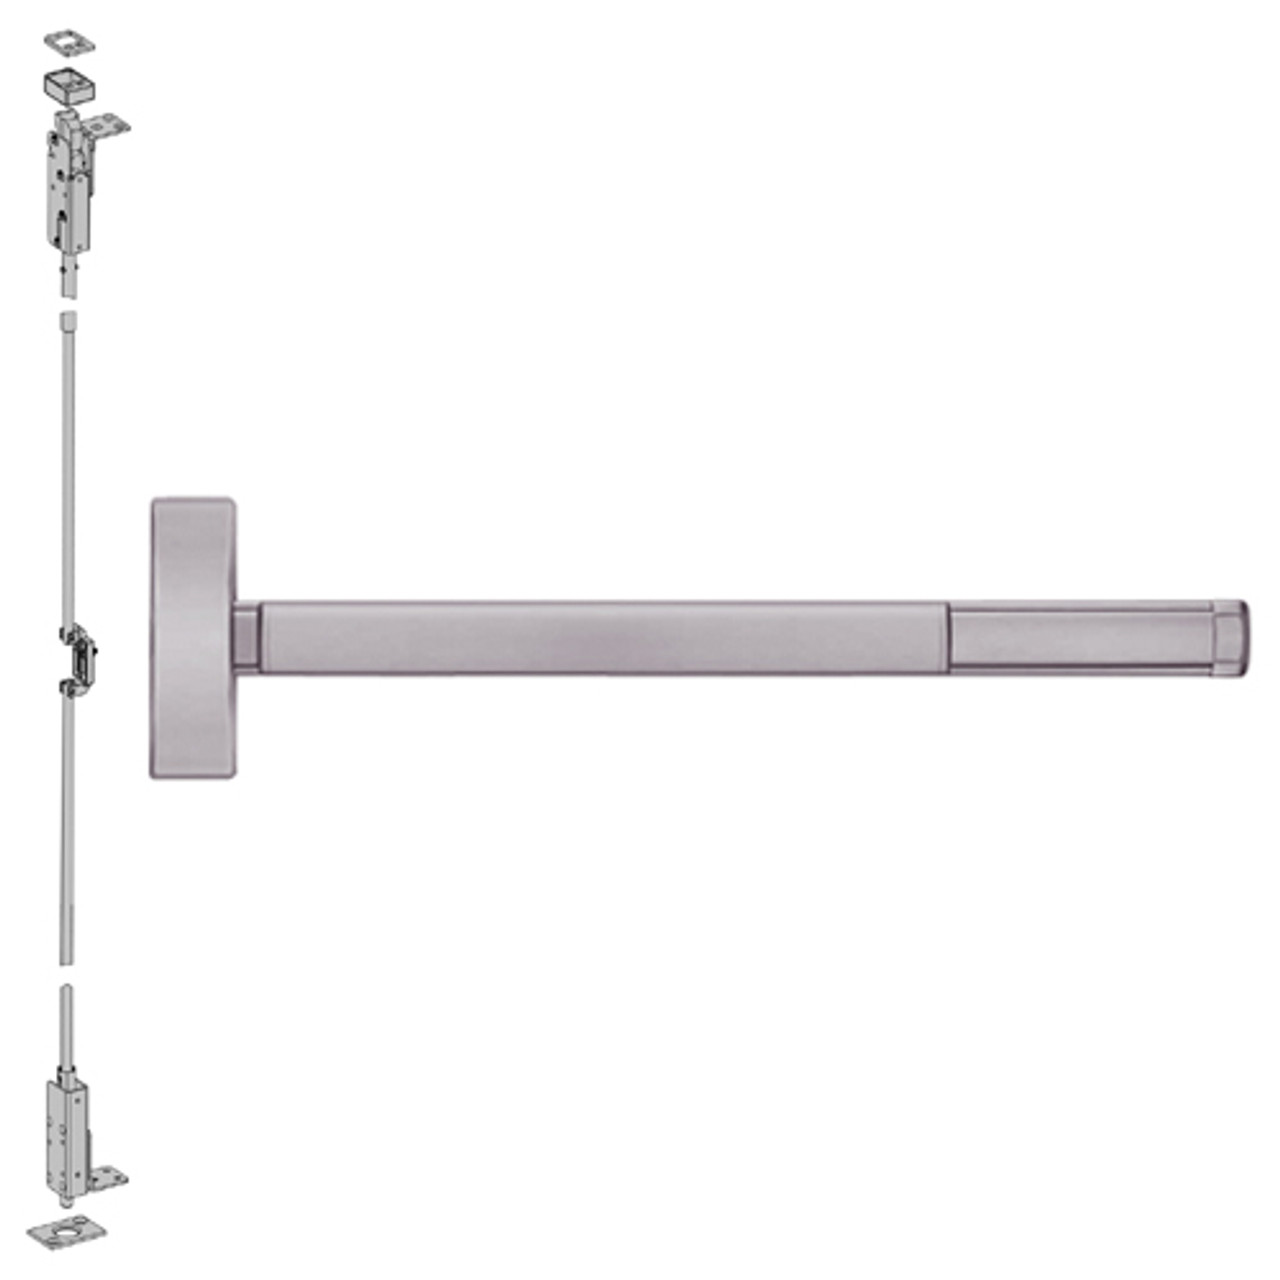 2715LBR-630-48 PHI 2700 Series Wood Door Concealed Vertical Rod Device Prepped for Thumbpiece Always Active with Less Bottom Rod in Satin Stainless Steel Finish